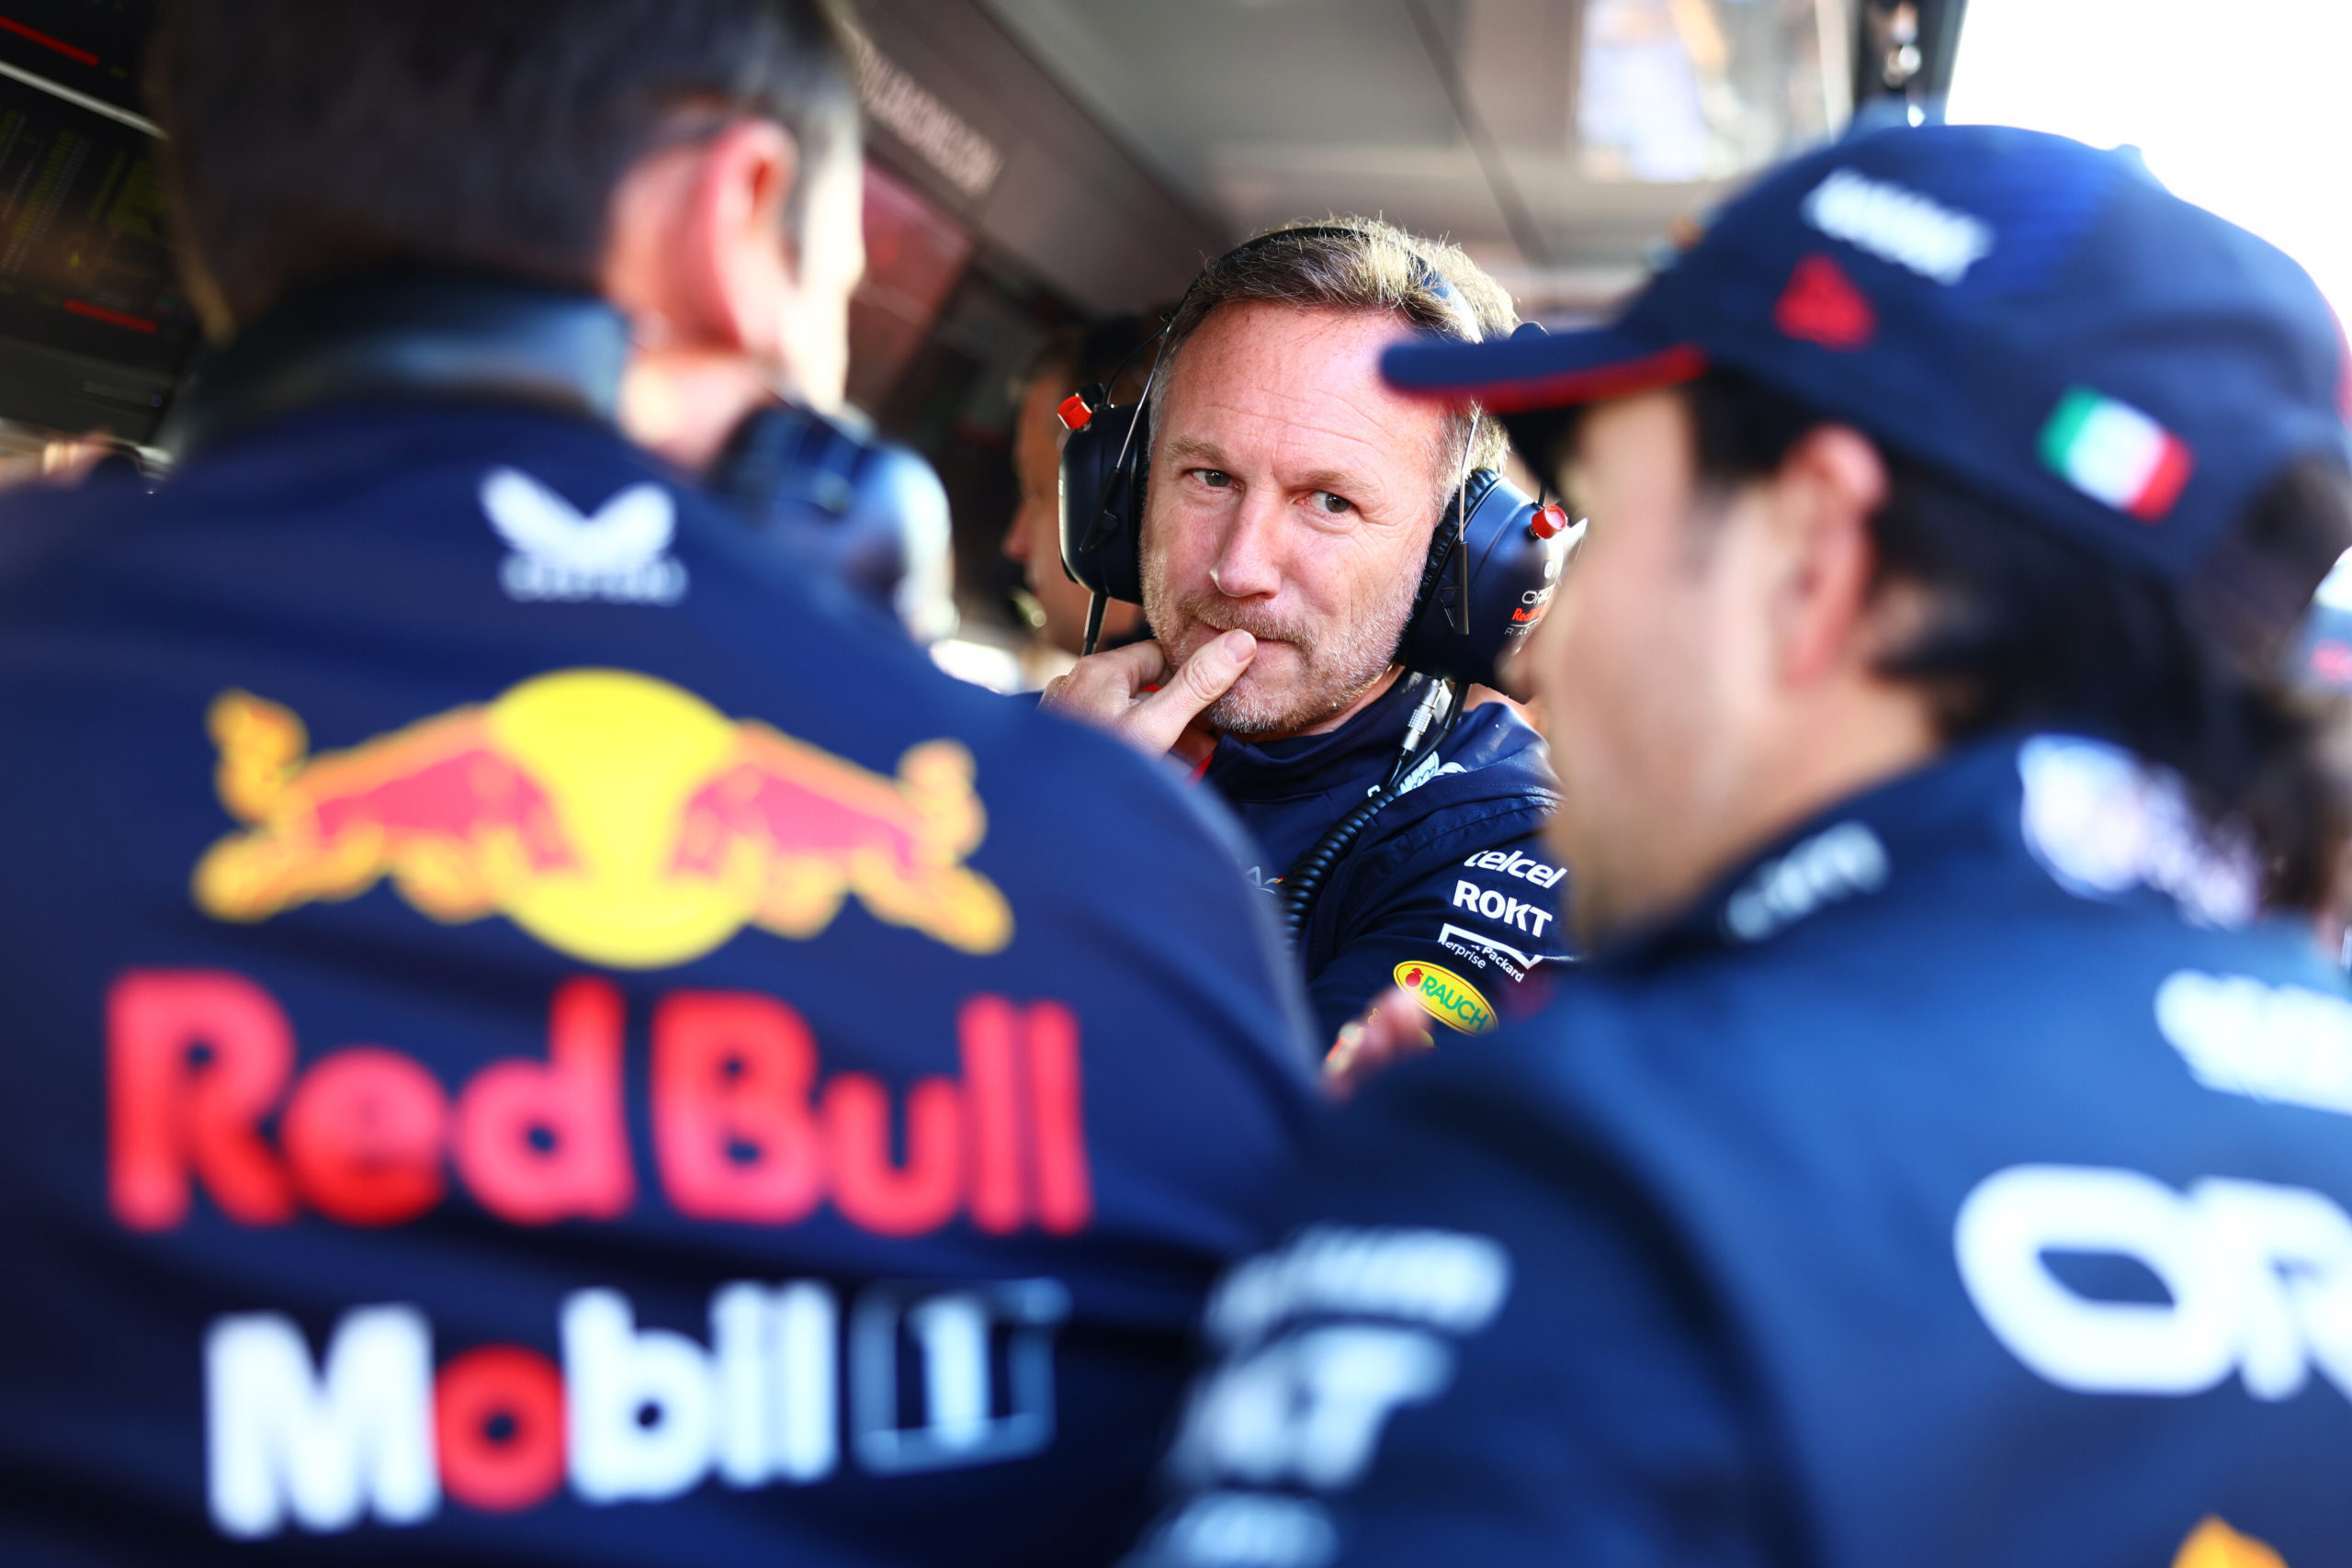 horner’s ‘proper circuits’ perez wish is blunt but spot on